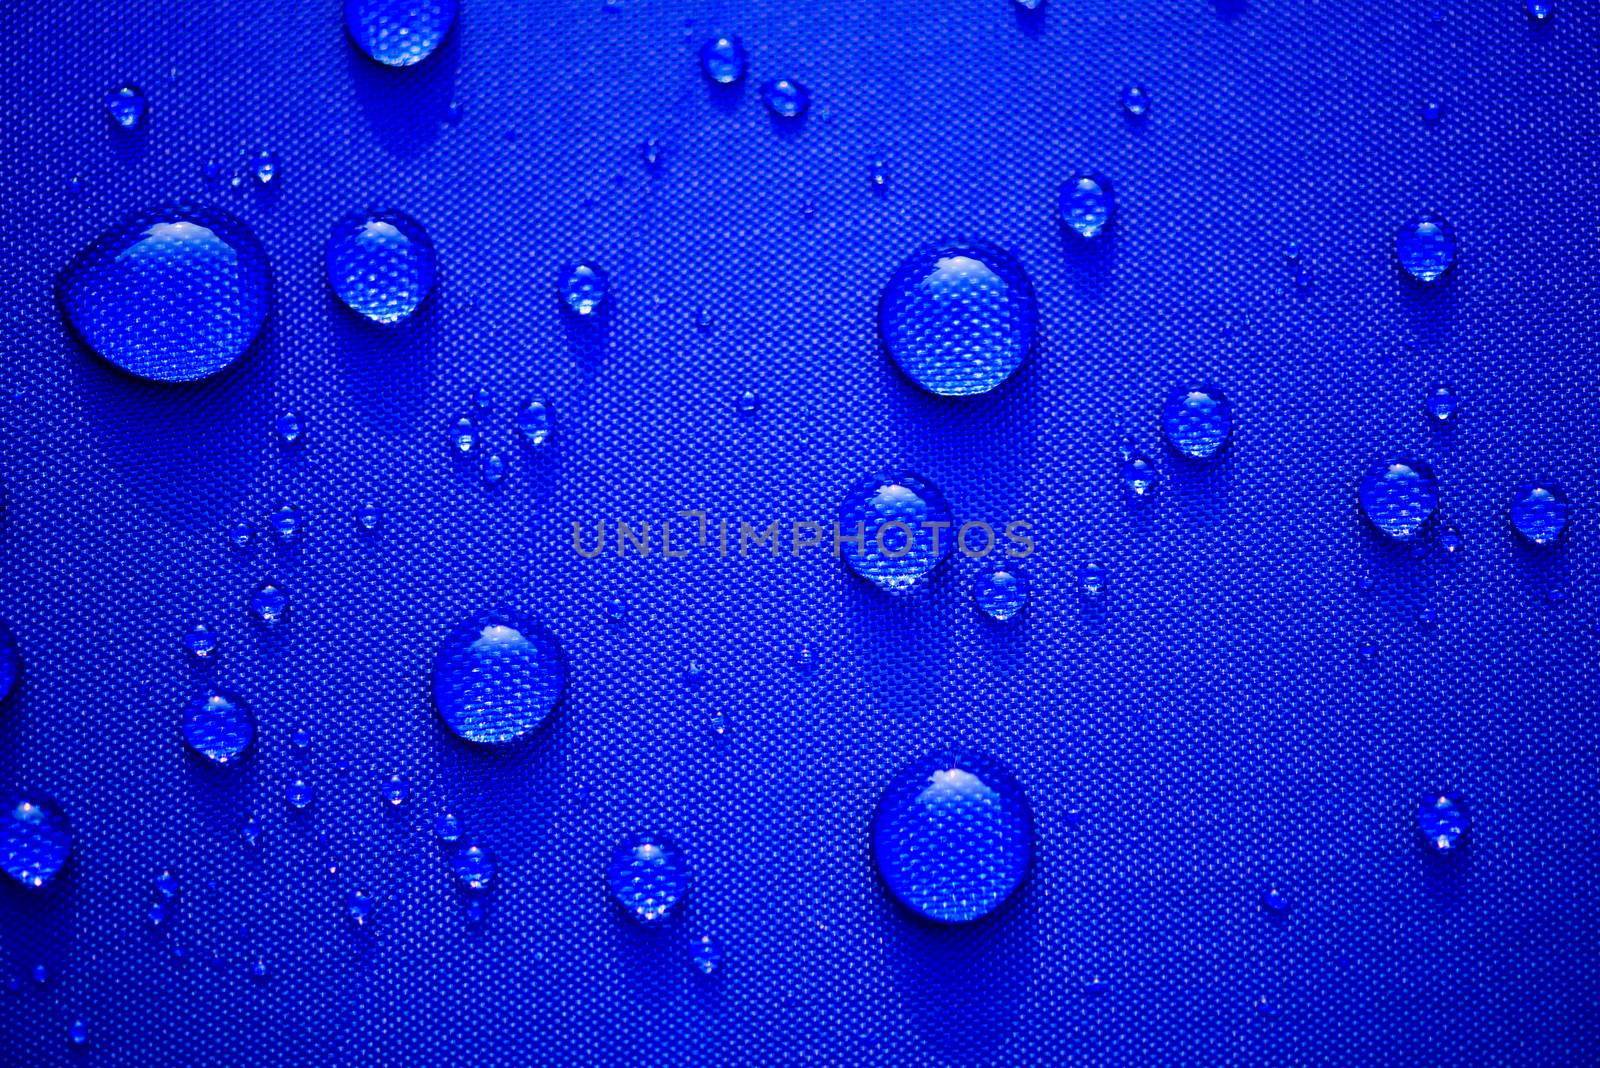 Close up Water drops pattern over a blue waterproof cloth backgr by spukkato